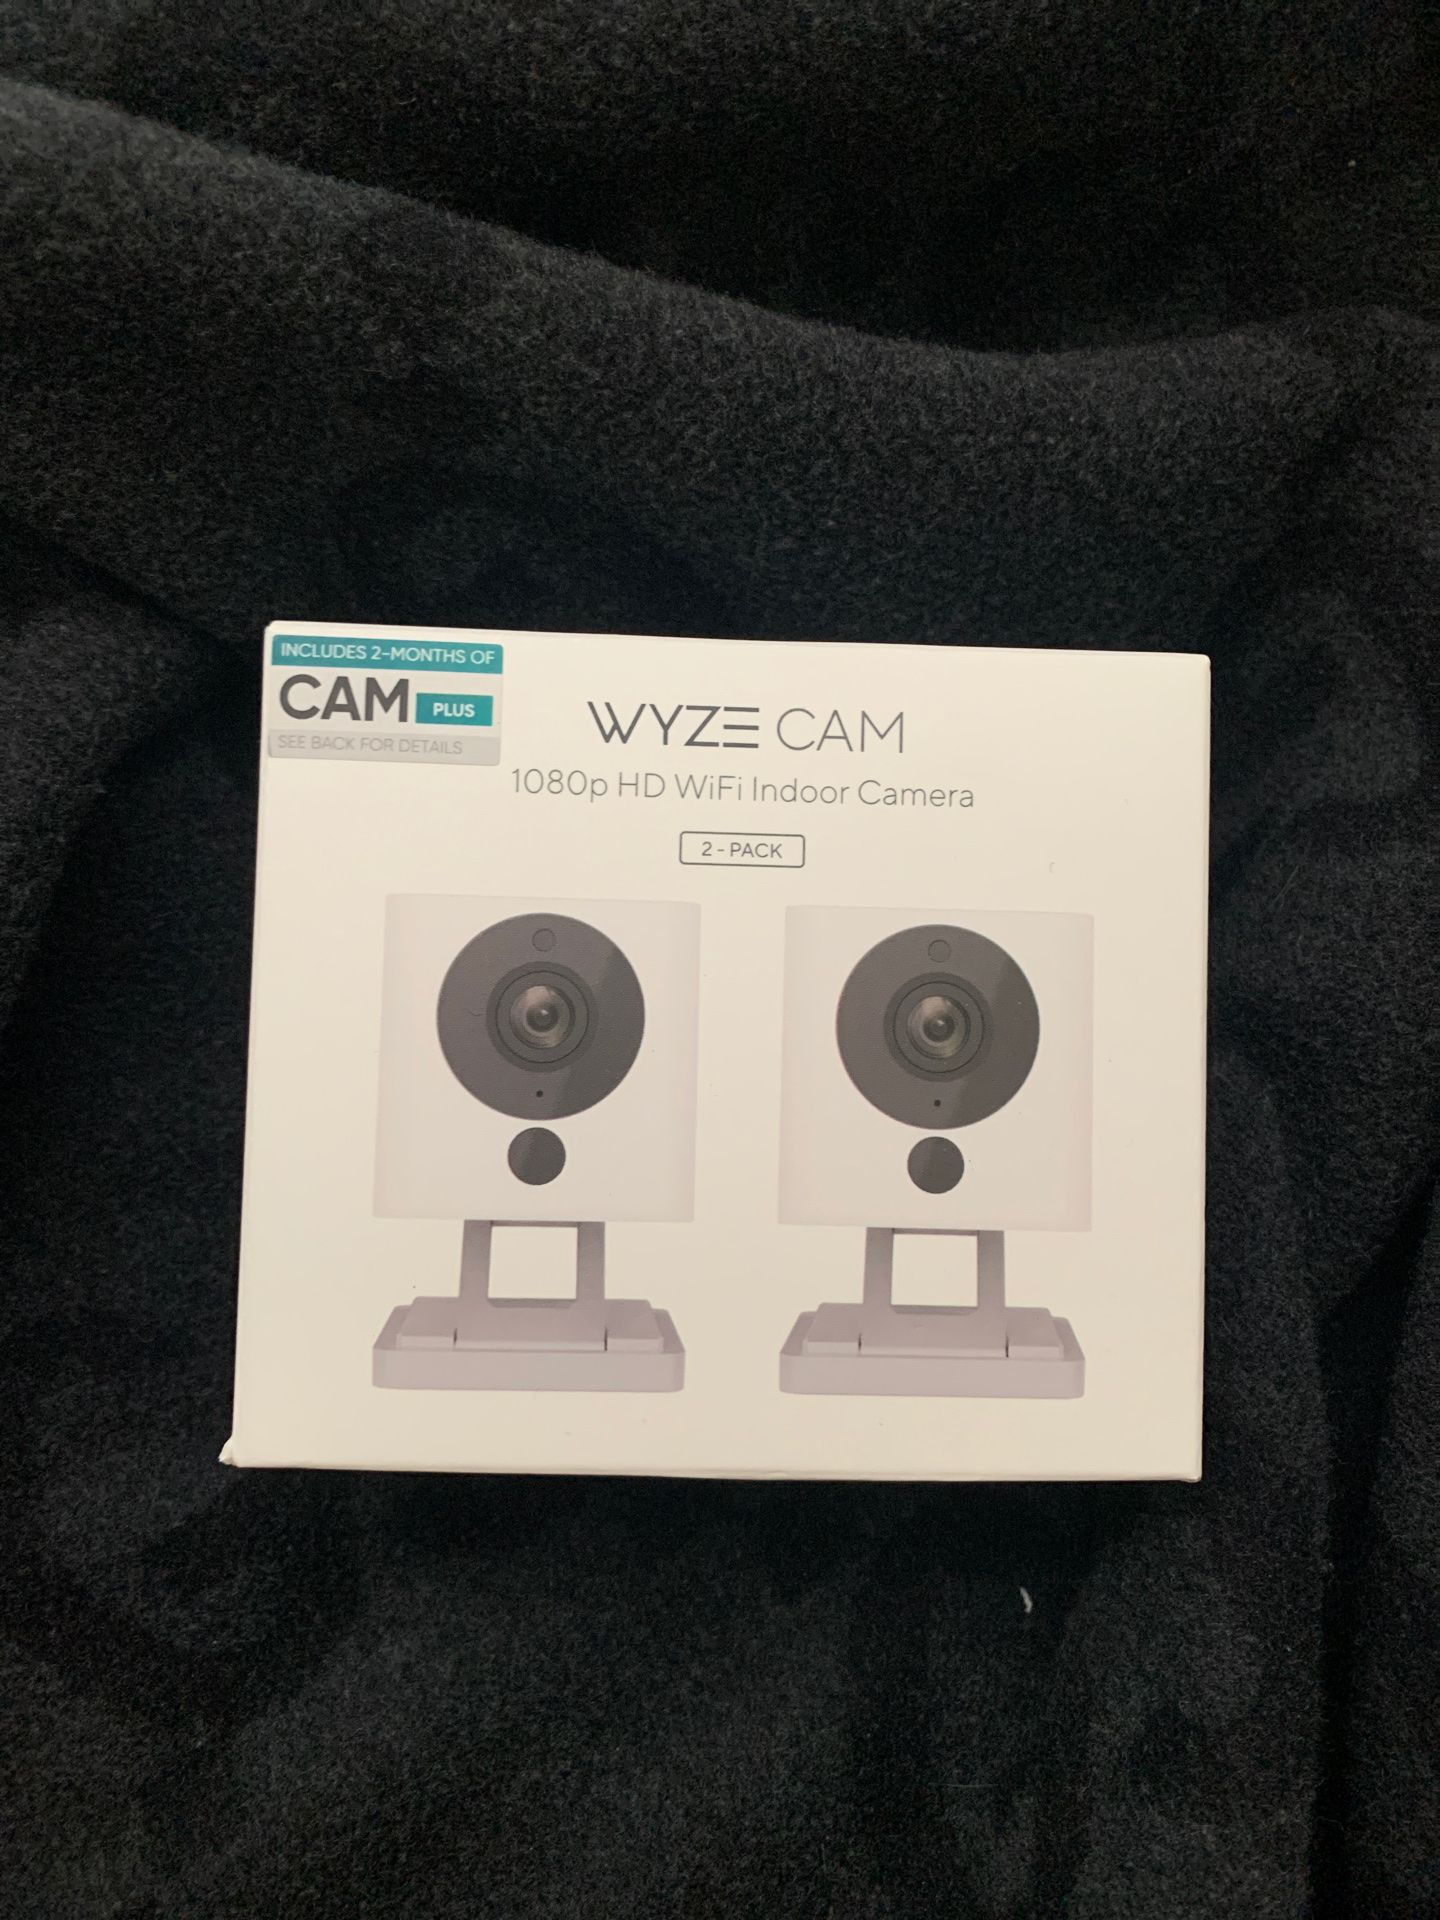 NEW! Wyze Cam 1080p HD WiFi indoor camera 2-pack